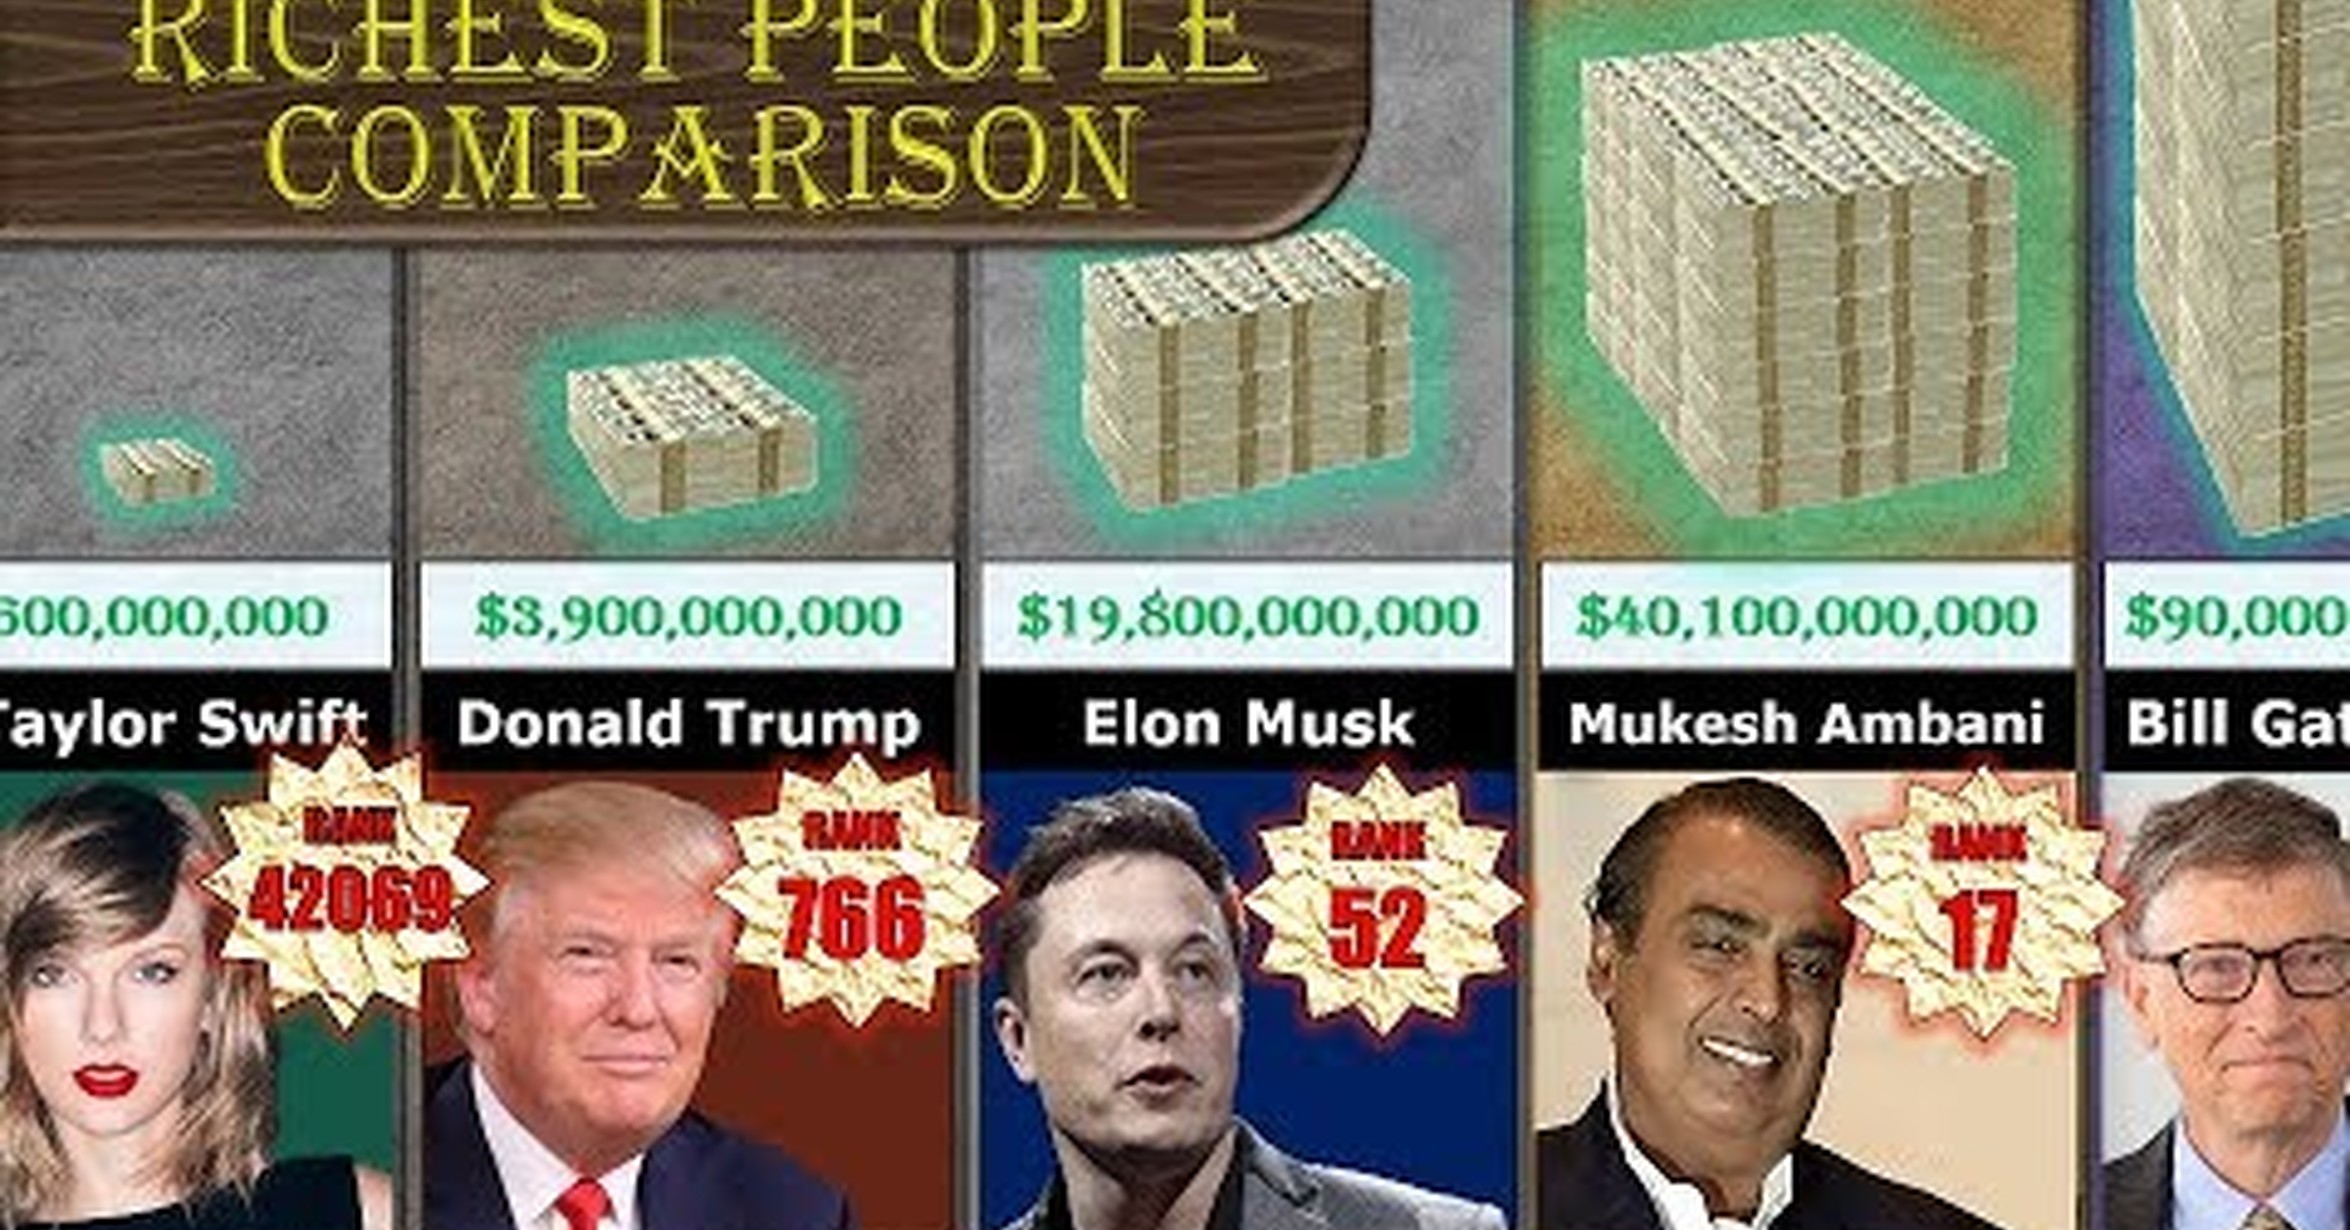 Comparative rich. Richest people in the World. The most Richest people in the World. Rich Comparative. Rich person t18756.